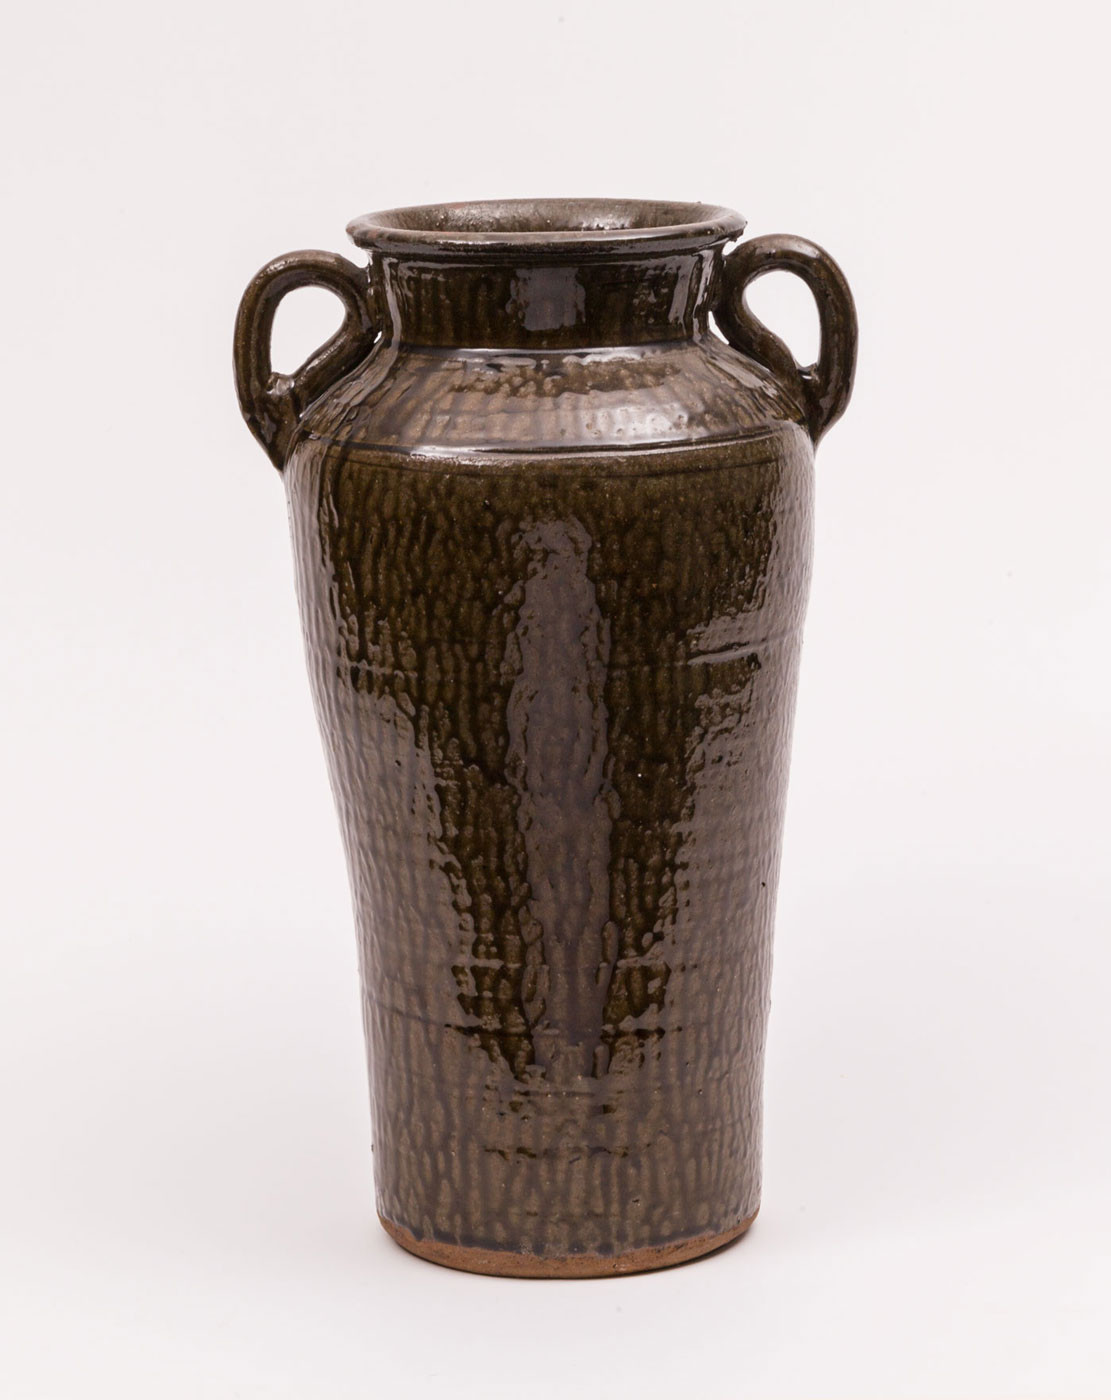 12 attractive Native American Pottery Wedding Vase 2024 free download native american pottery wedding vase of smithsonian folklife festival 50 years 50 objects within churn